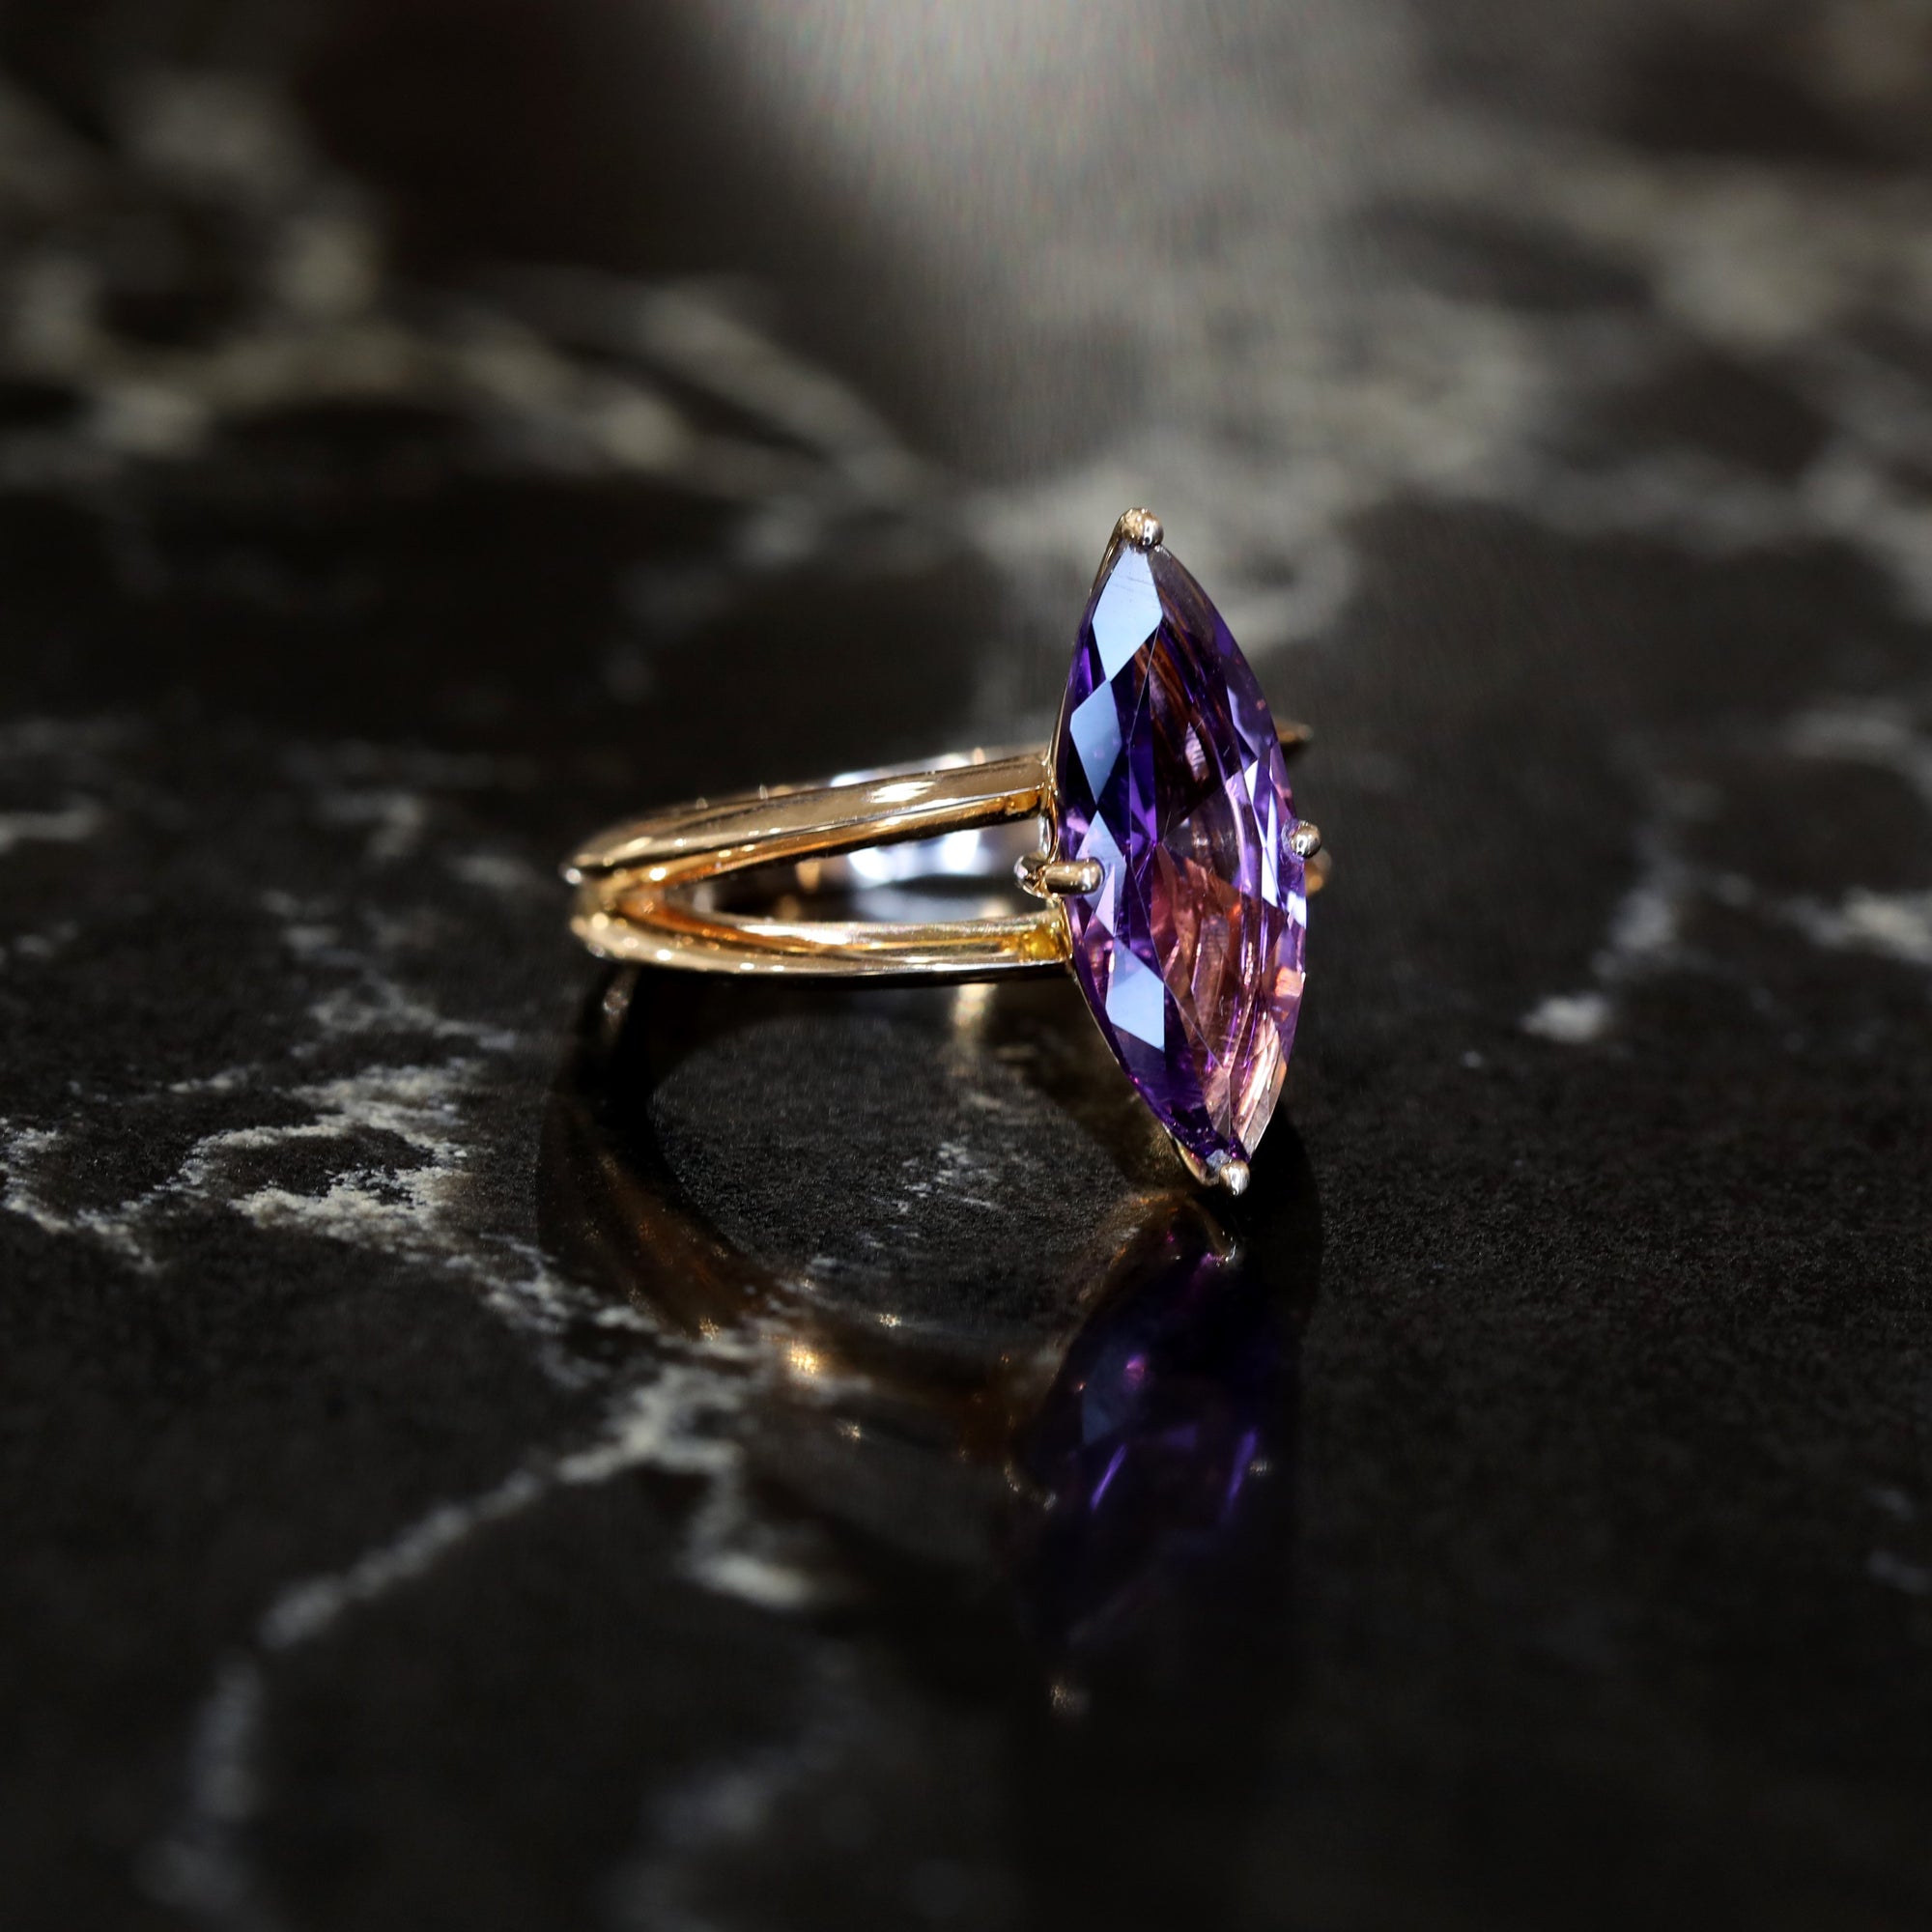 amethyst cocktail ring rose gold bena jewelry edgy color gemstone ring made in montreal fine jewelry designer marquise shape violette purple rose de france amethyst made in montreal